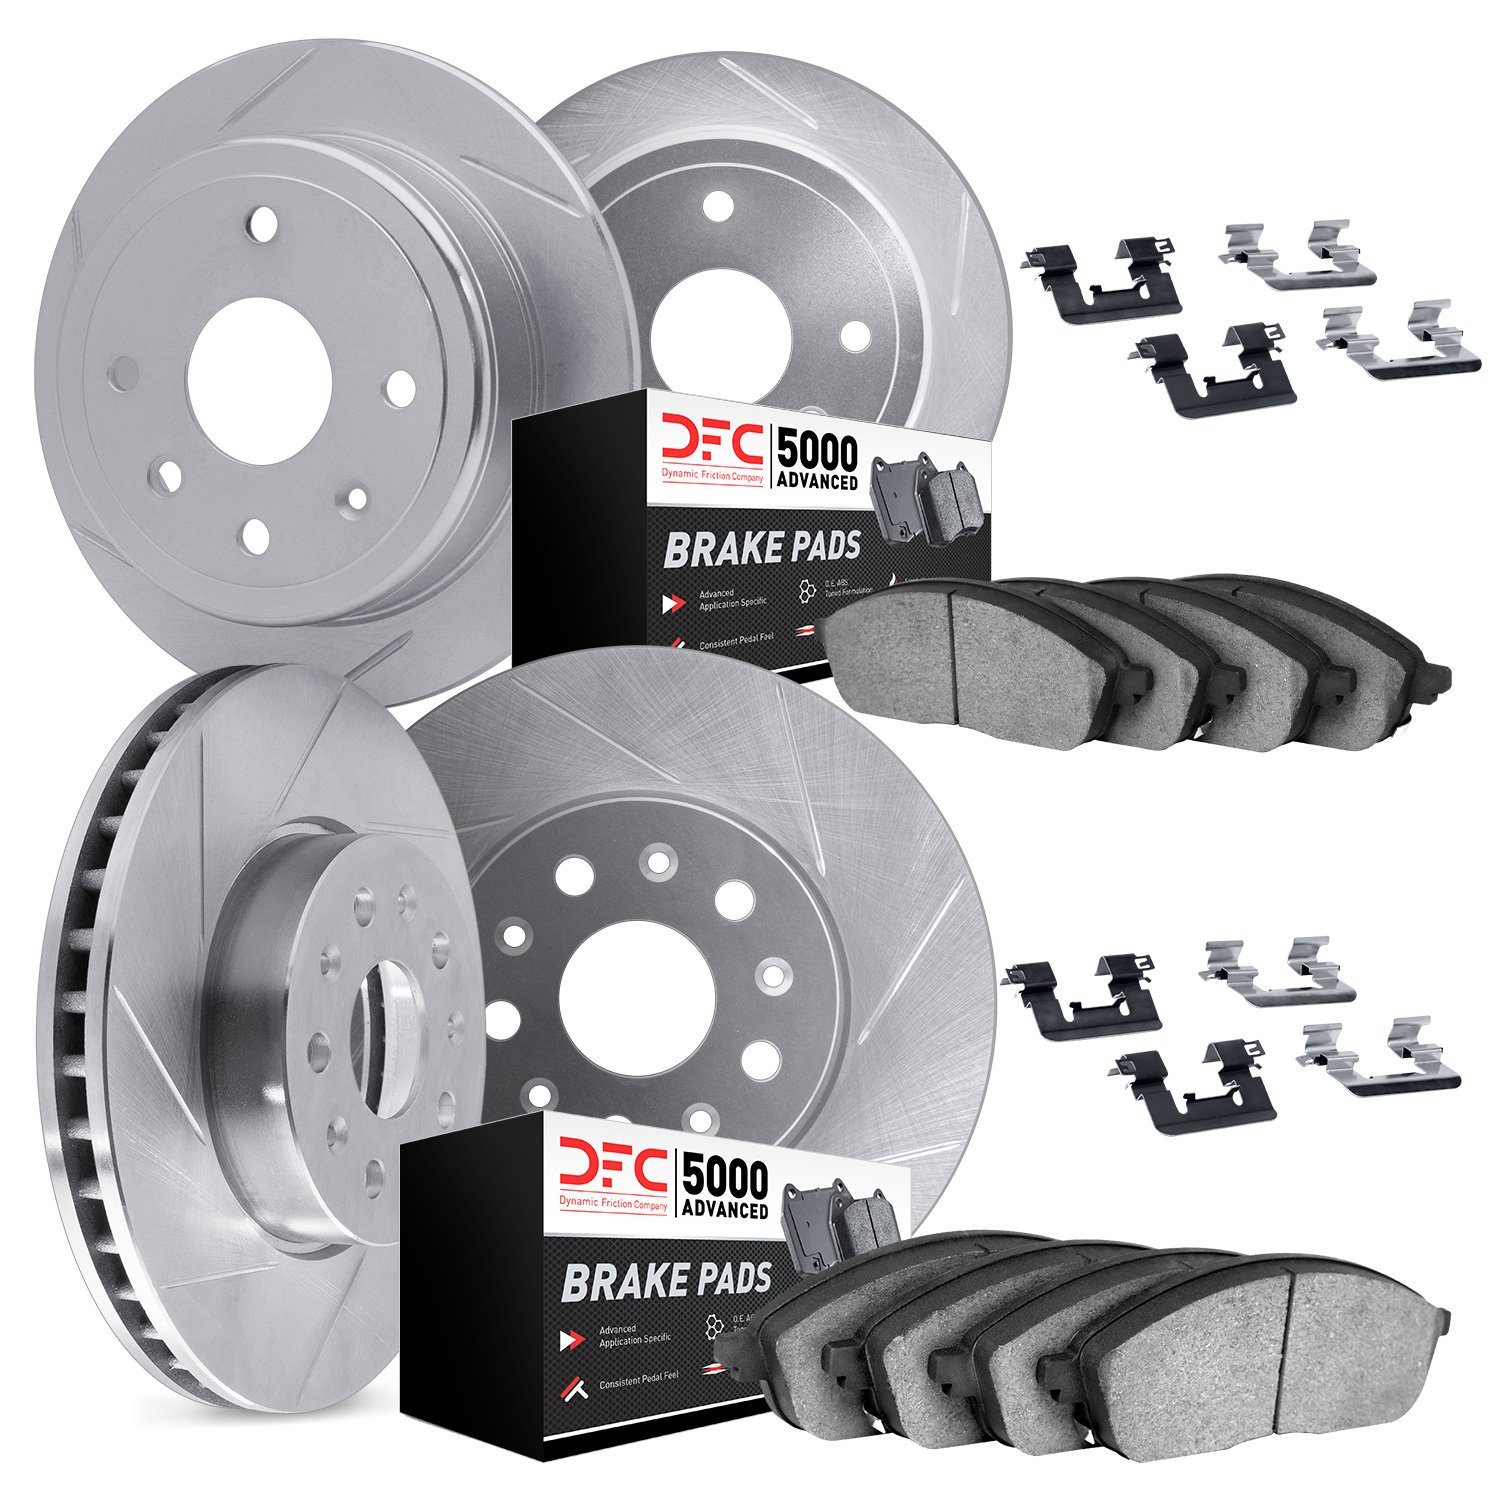 5514-42001 Slotted Brake Rotors w/5000 Advanced Brake Pads Kit & Hardware [Silver], 1993-1993 Mopar, Position: Front and Rear